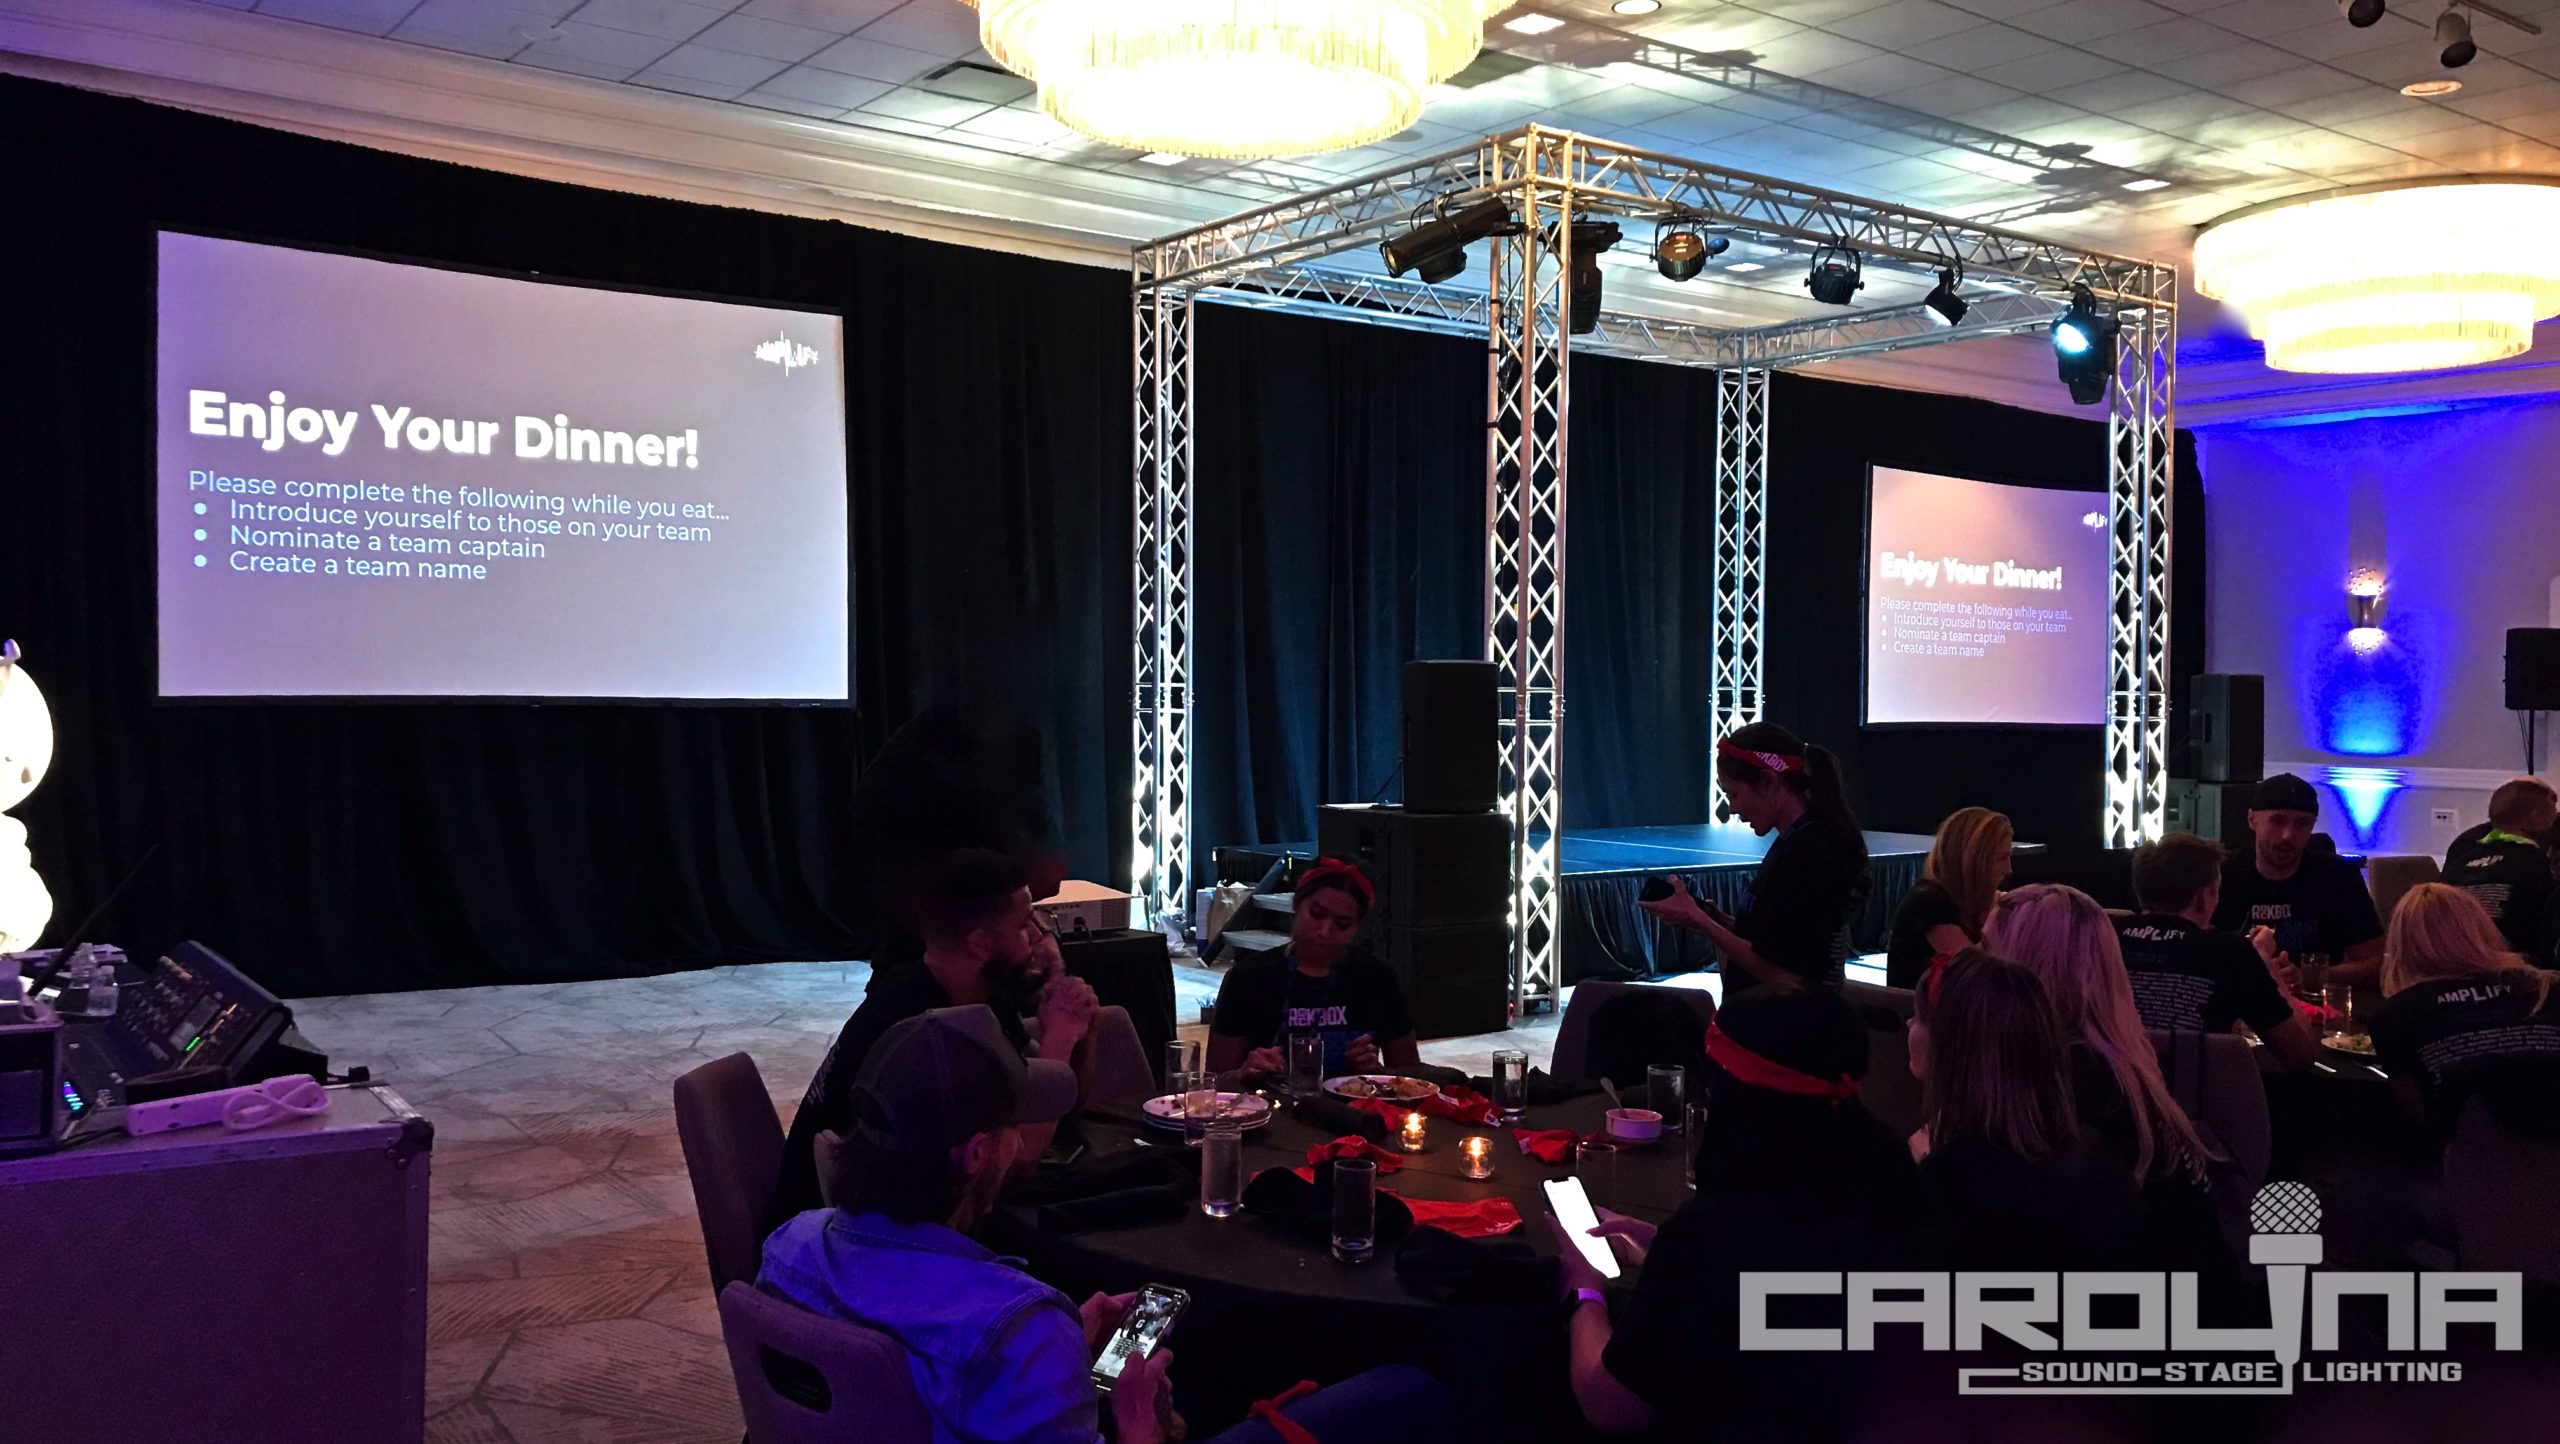 corporate av Carolina sound stage lighting Charlotte video projection pipe and drape nc sc events global truss 